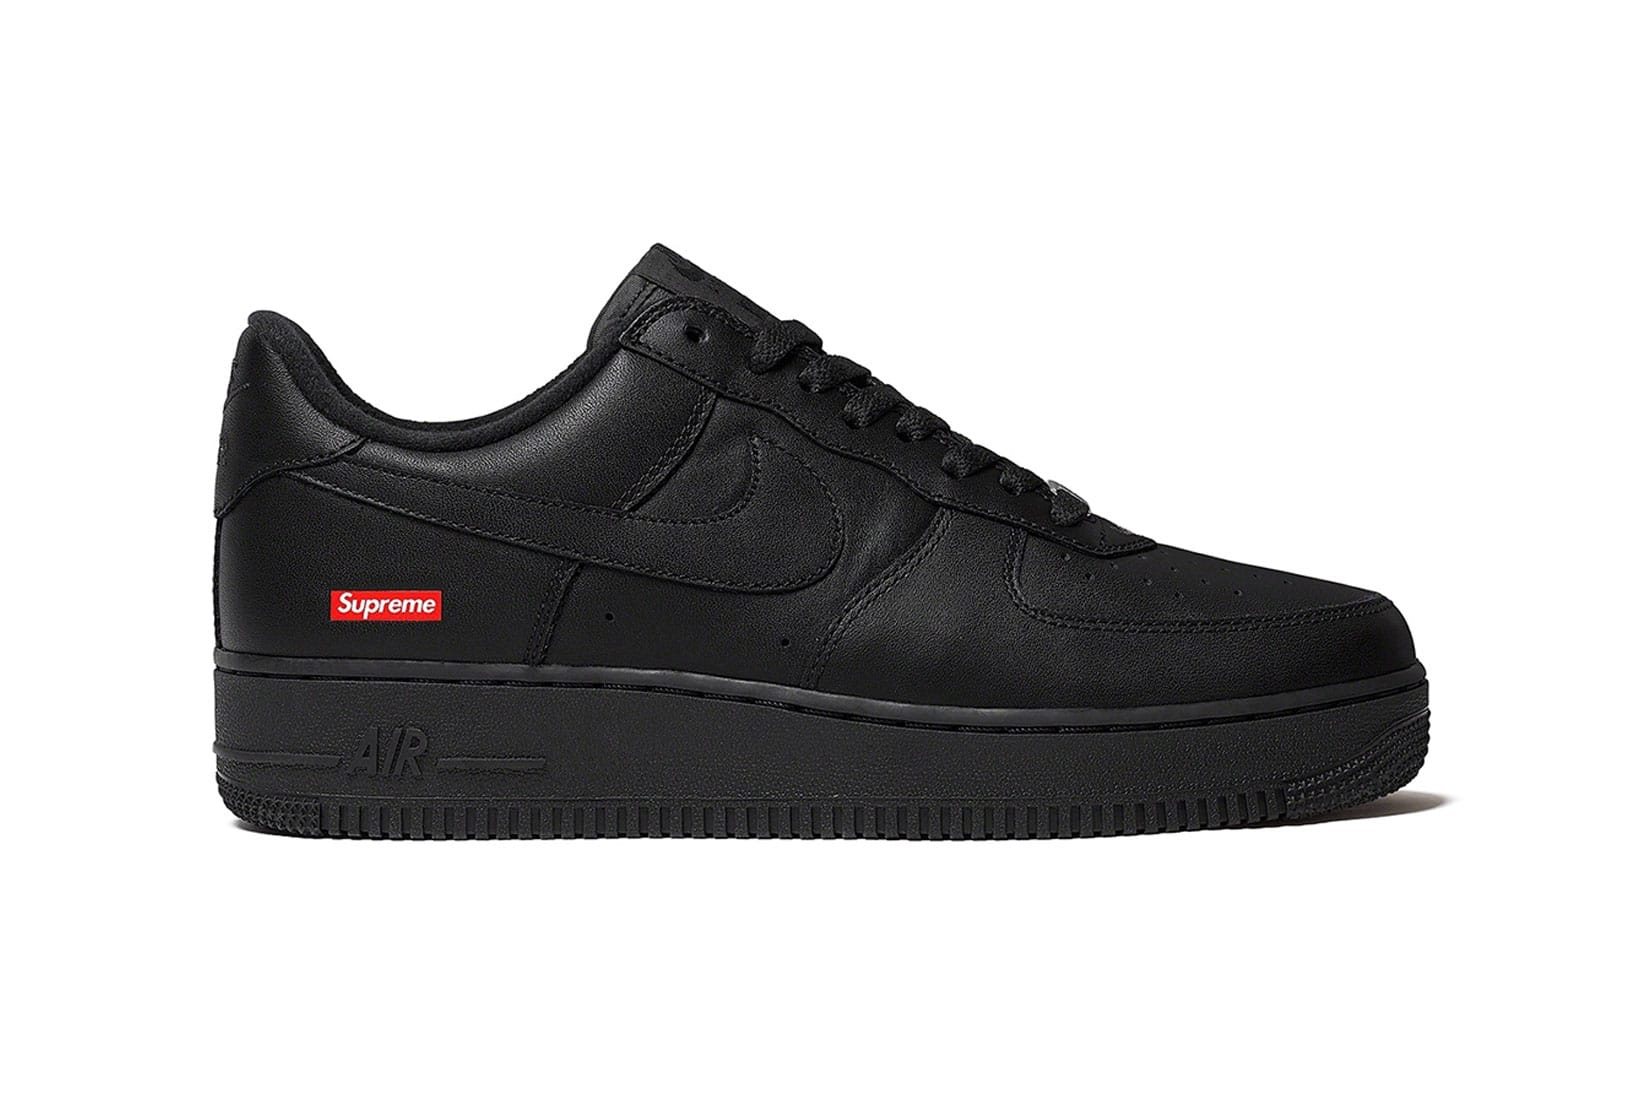 when is the supreme air force 1 restock